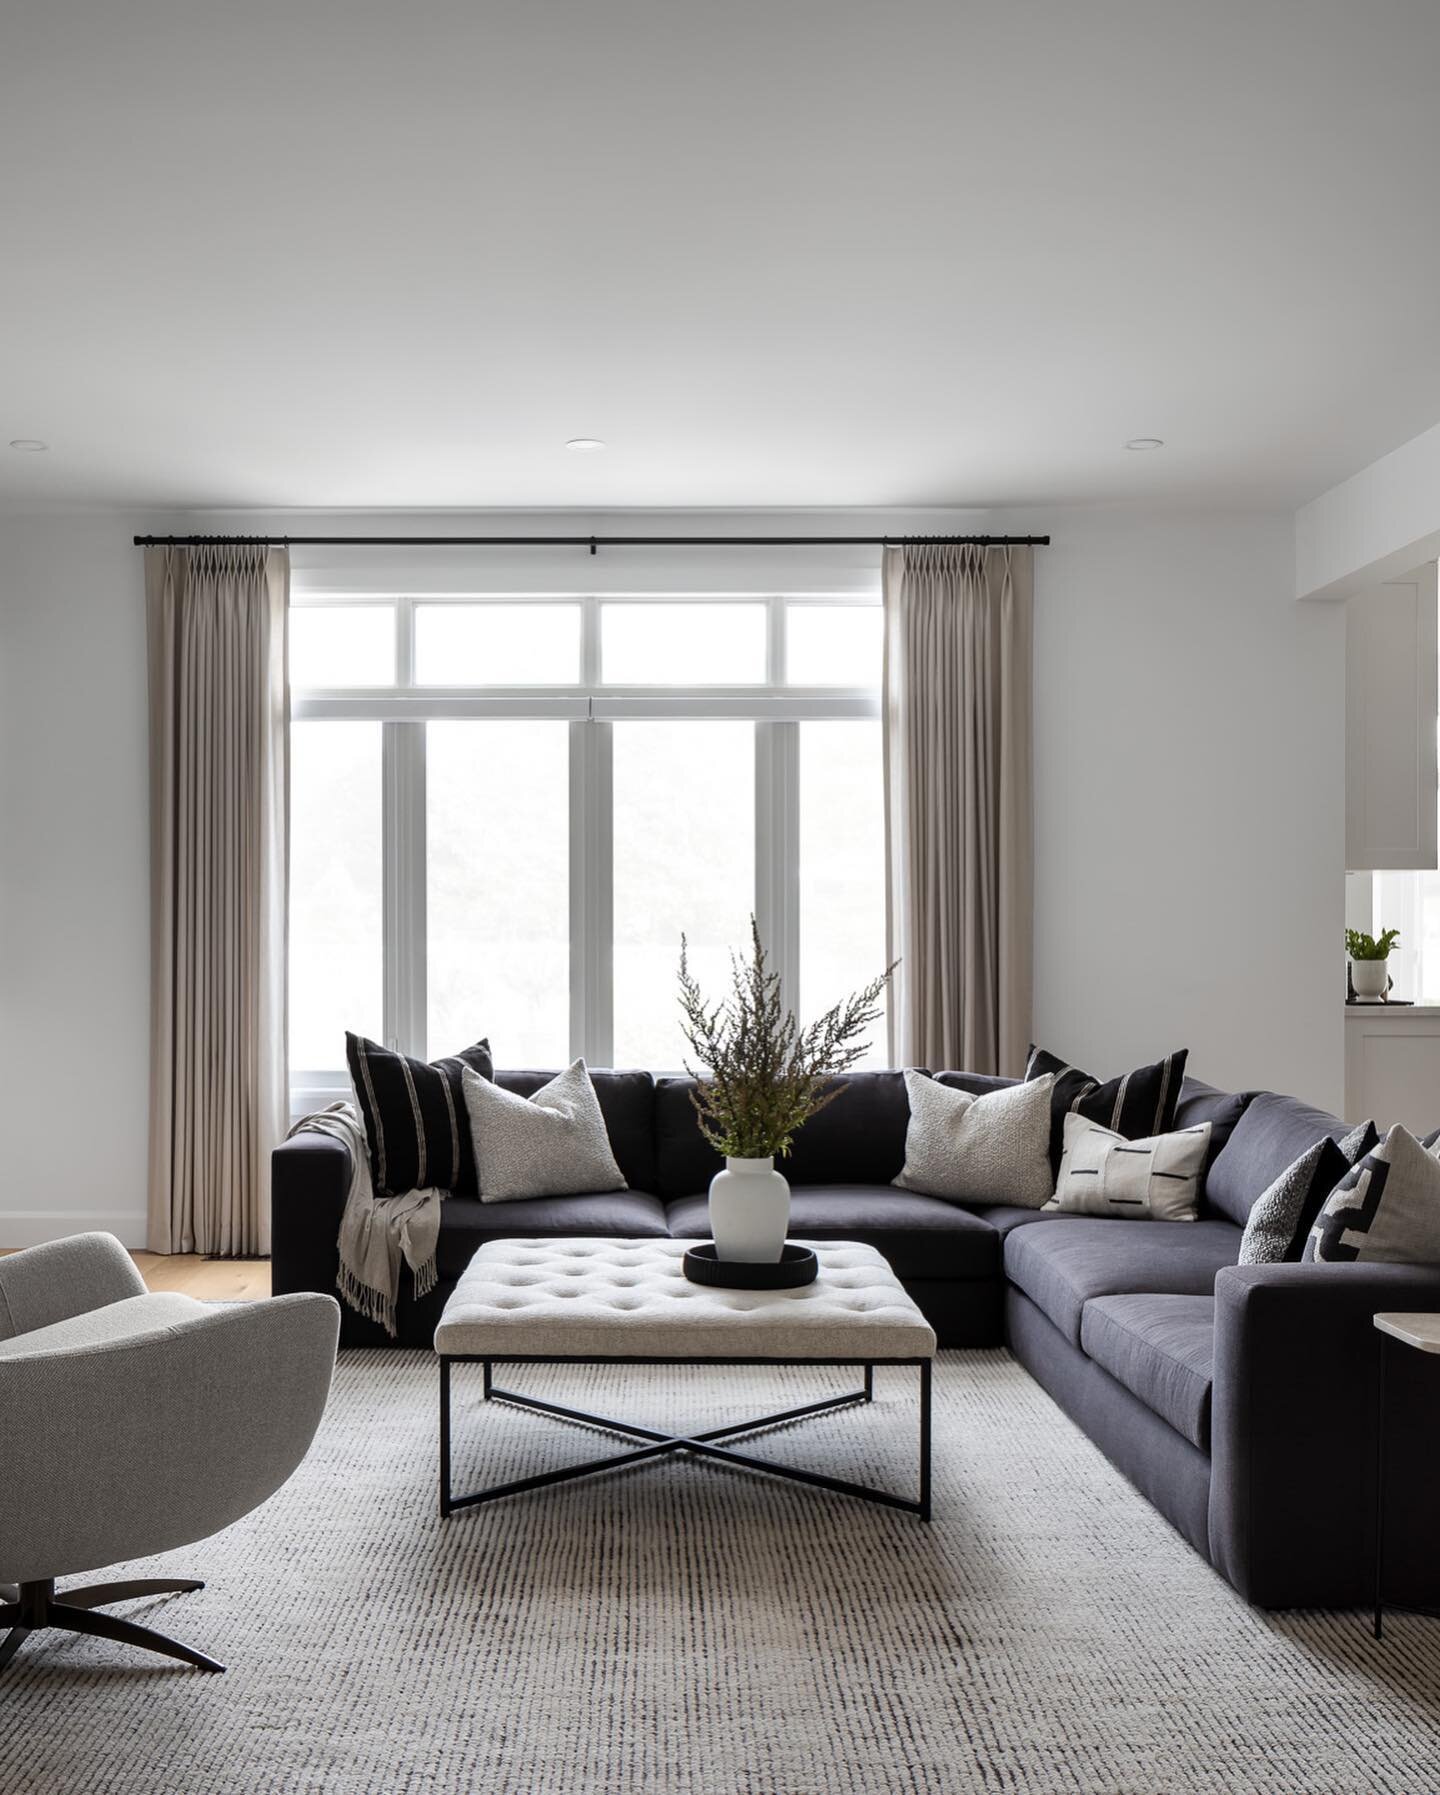 It&rsquo;s no secret that we love a good neutral, high contrast palette and this space displays it beautifully 

Design: @studio.moffatt
Photography: @swizzler

#interiordesign 
#interiordesigner
#interiordesignideas
 #interiordecorideas
#interiorsty